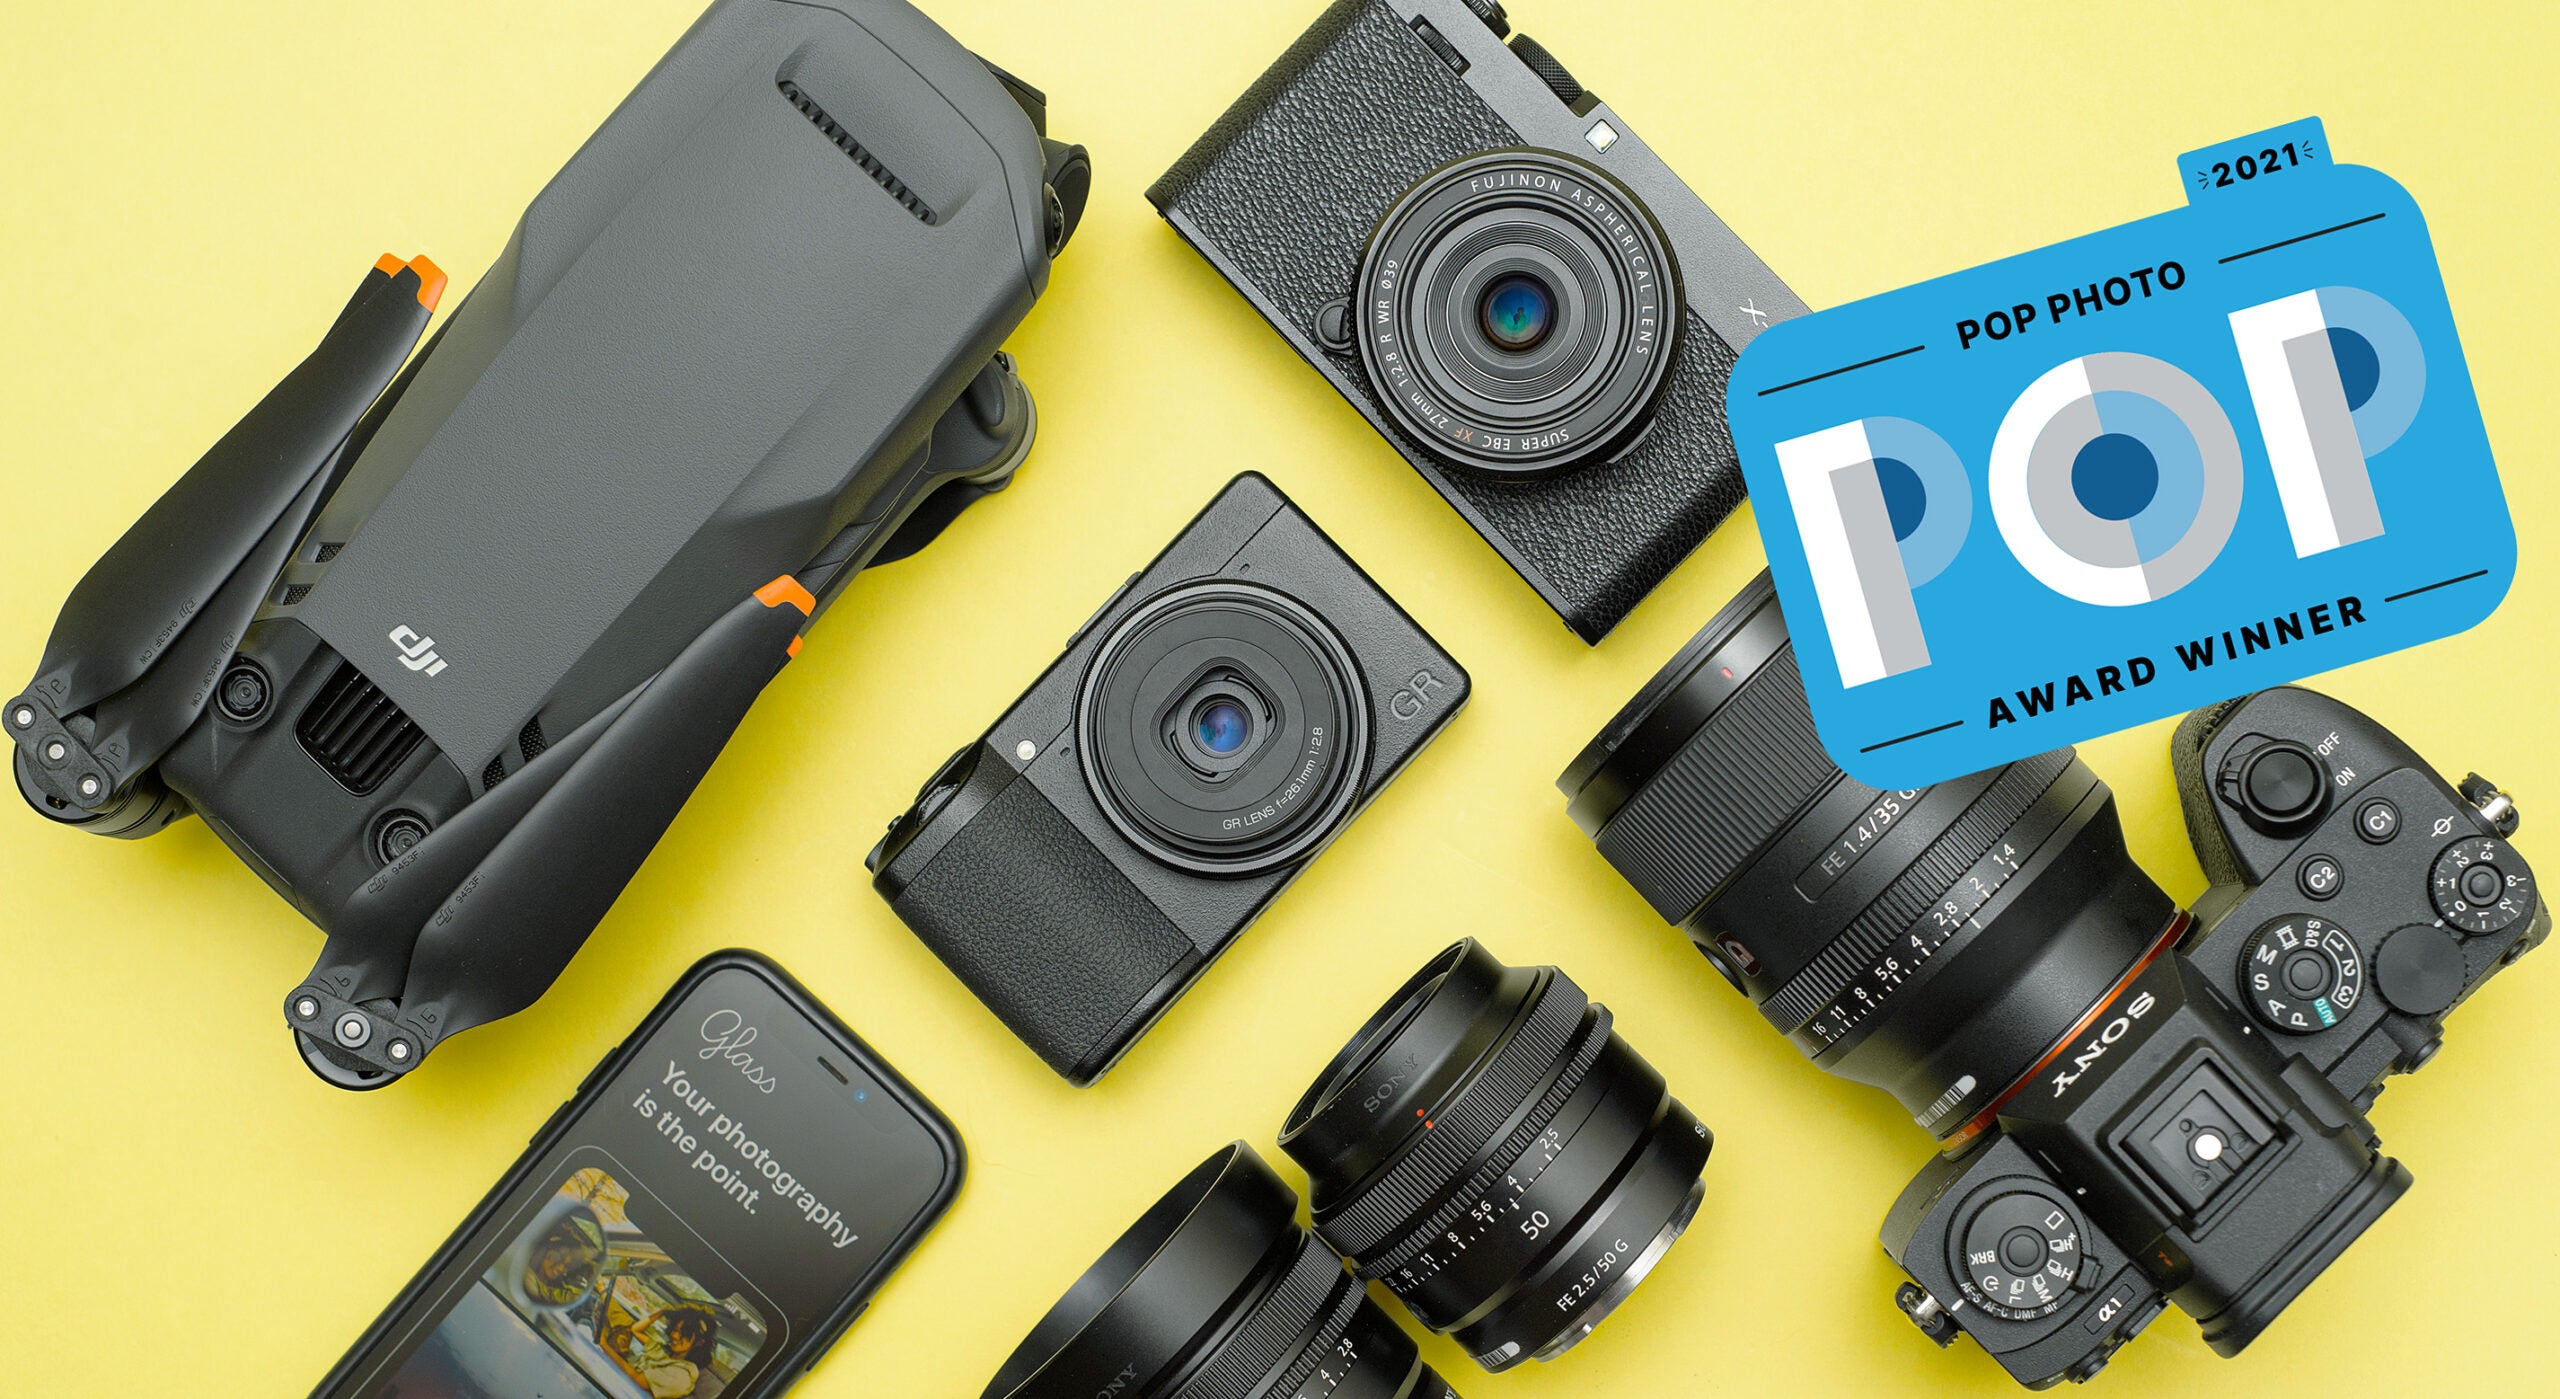 oosters Gang boog Pop Awards: 2021's best camera and photo gear | Popular Photography